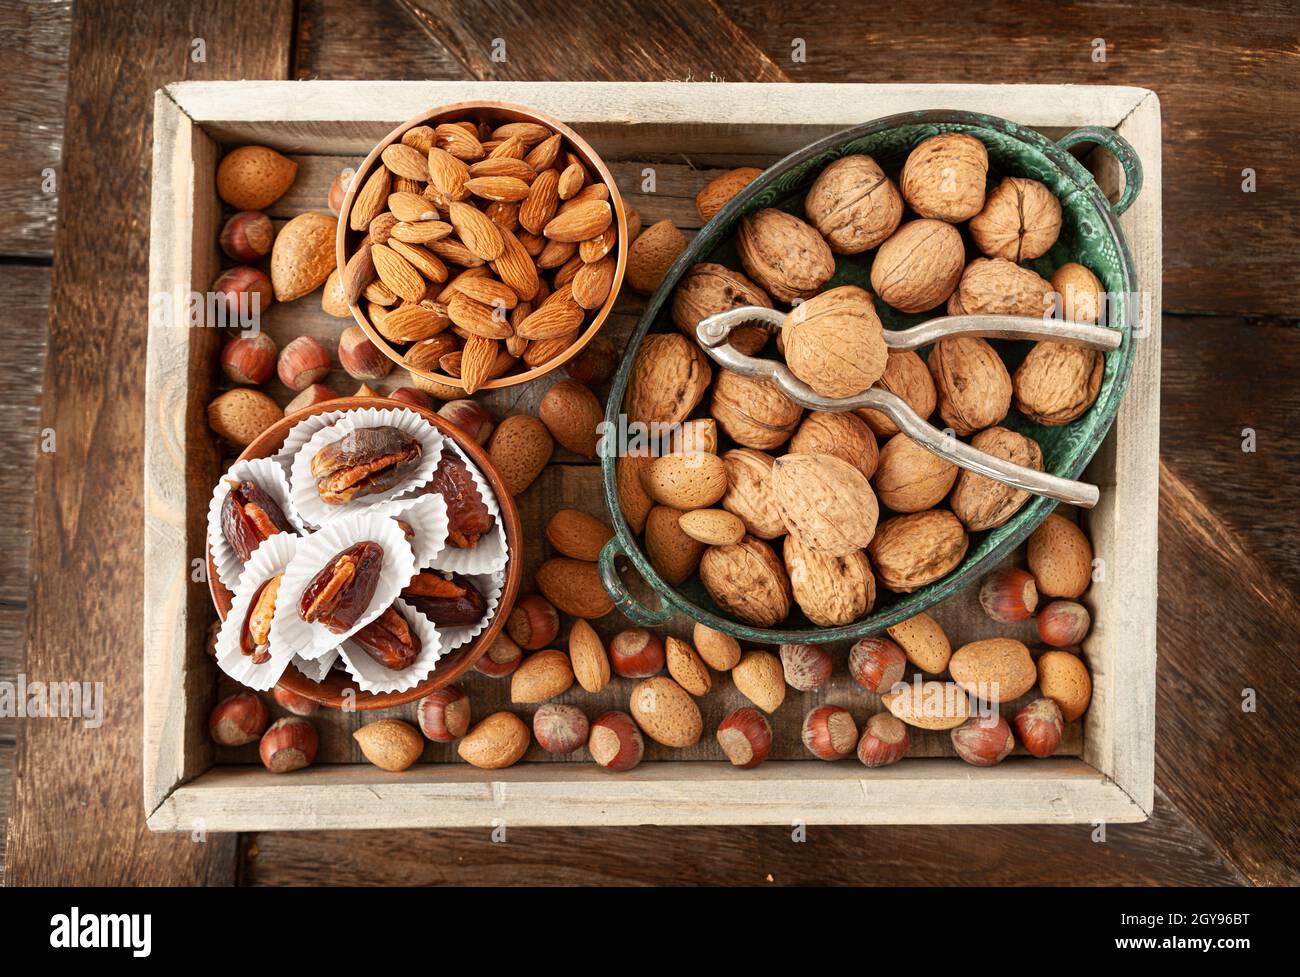 Selection of nuts and dates in rustic wooden tray Stock Photo